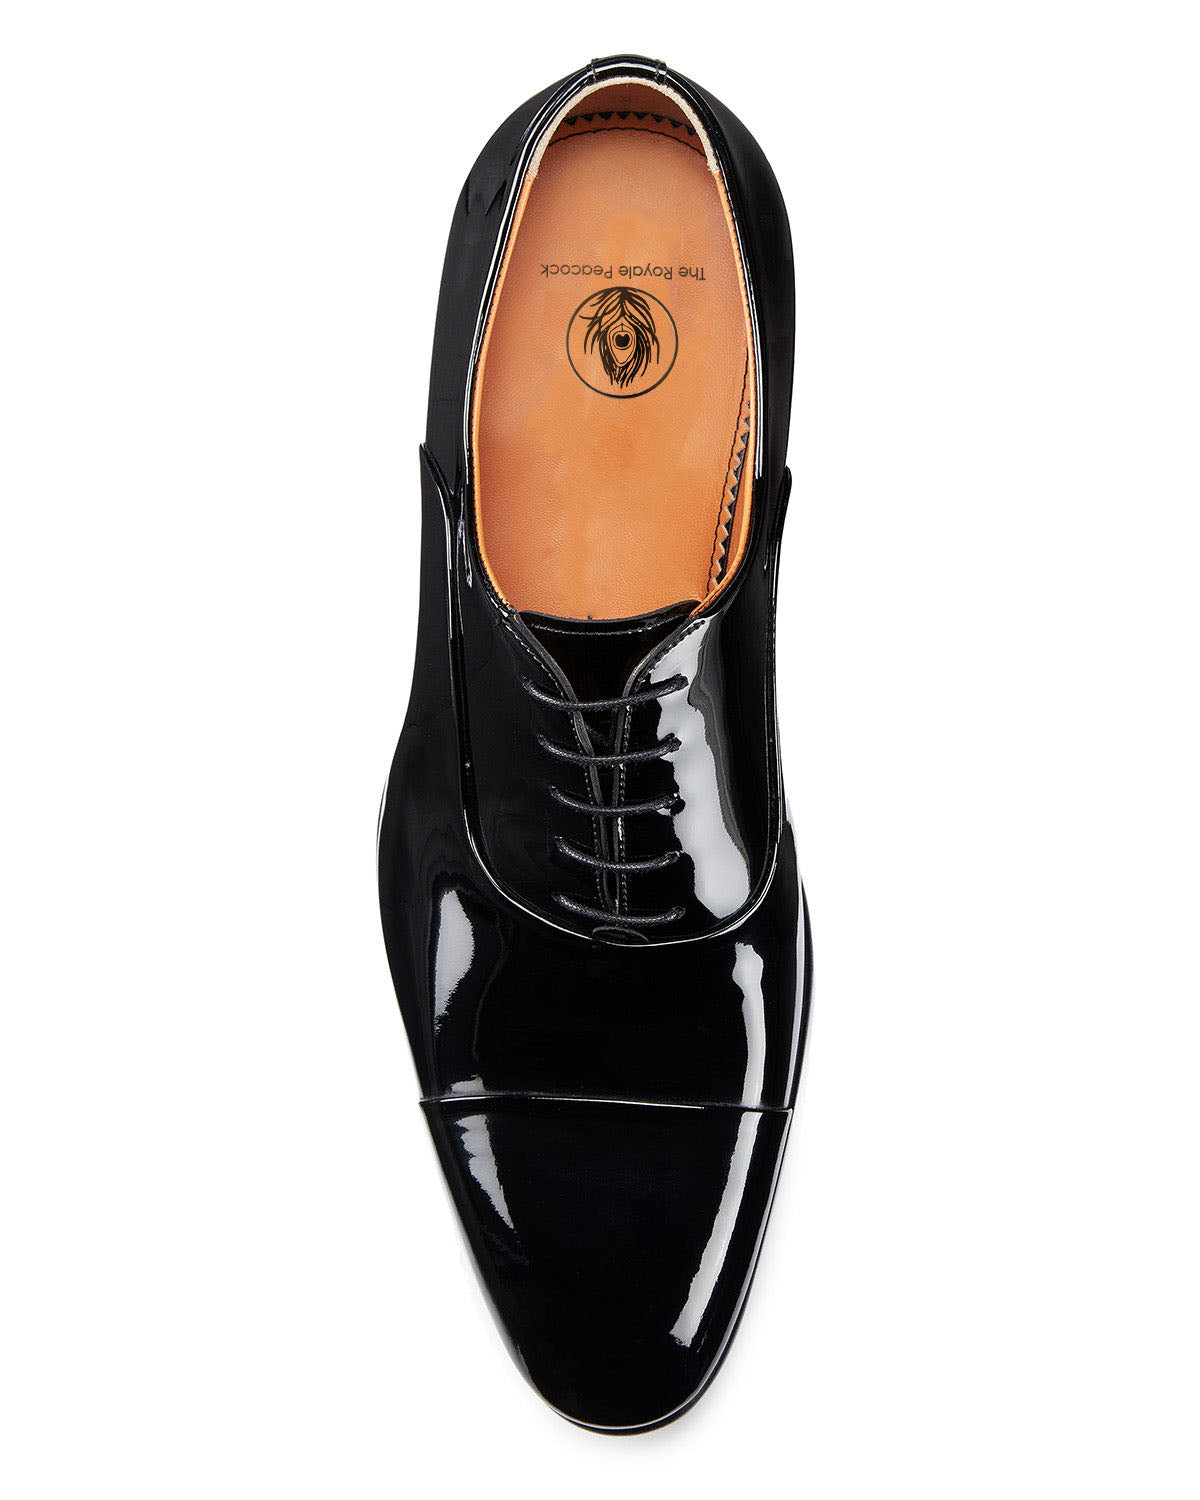 Black Patent Leather Formal Toe Cap Oxford Lace Up Shoes for Men with Leather Sole. Goodyear Welted Construction Available.